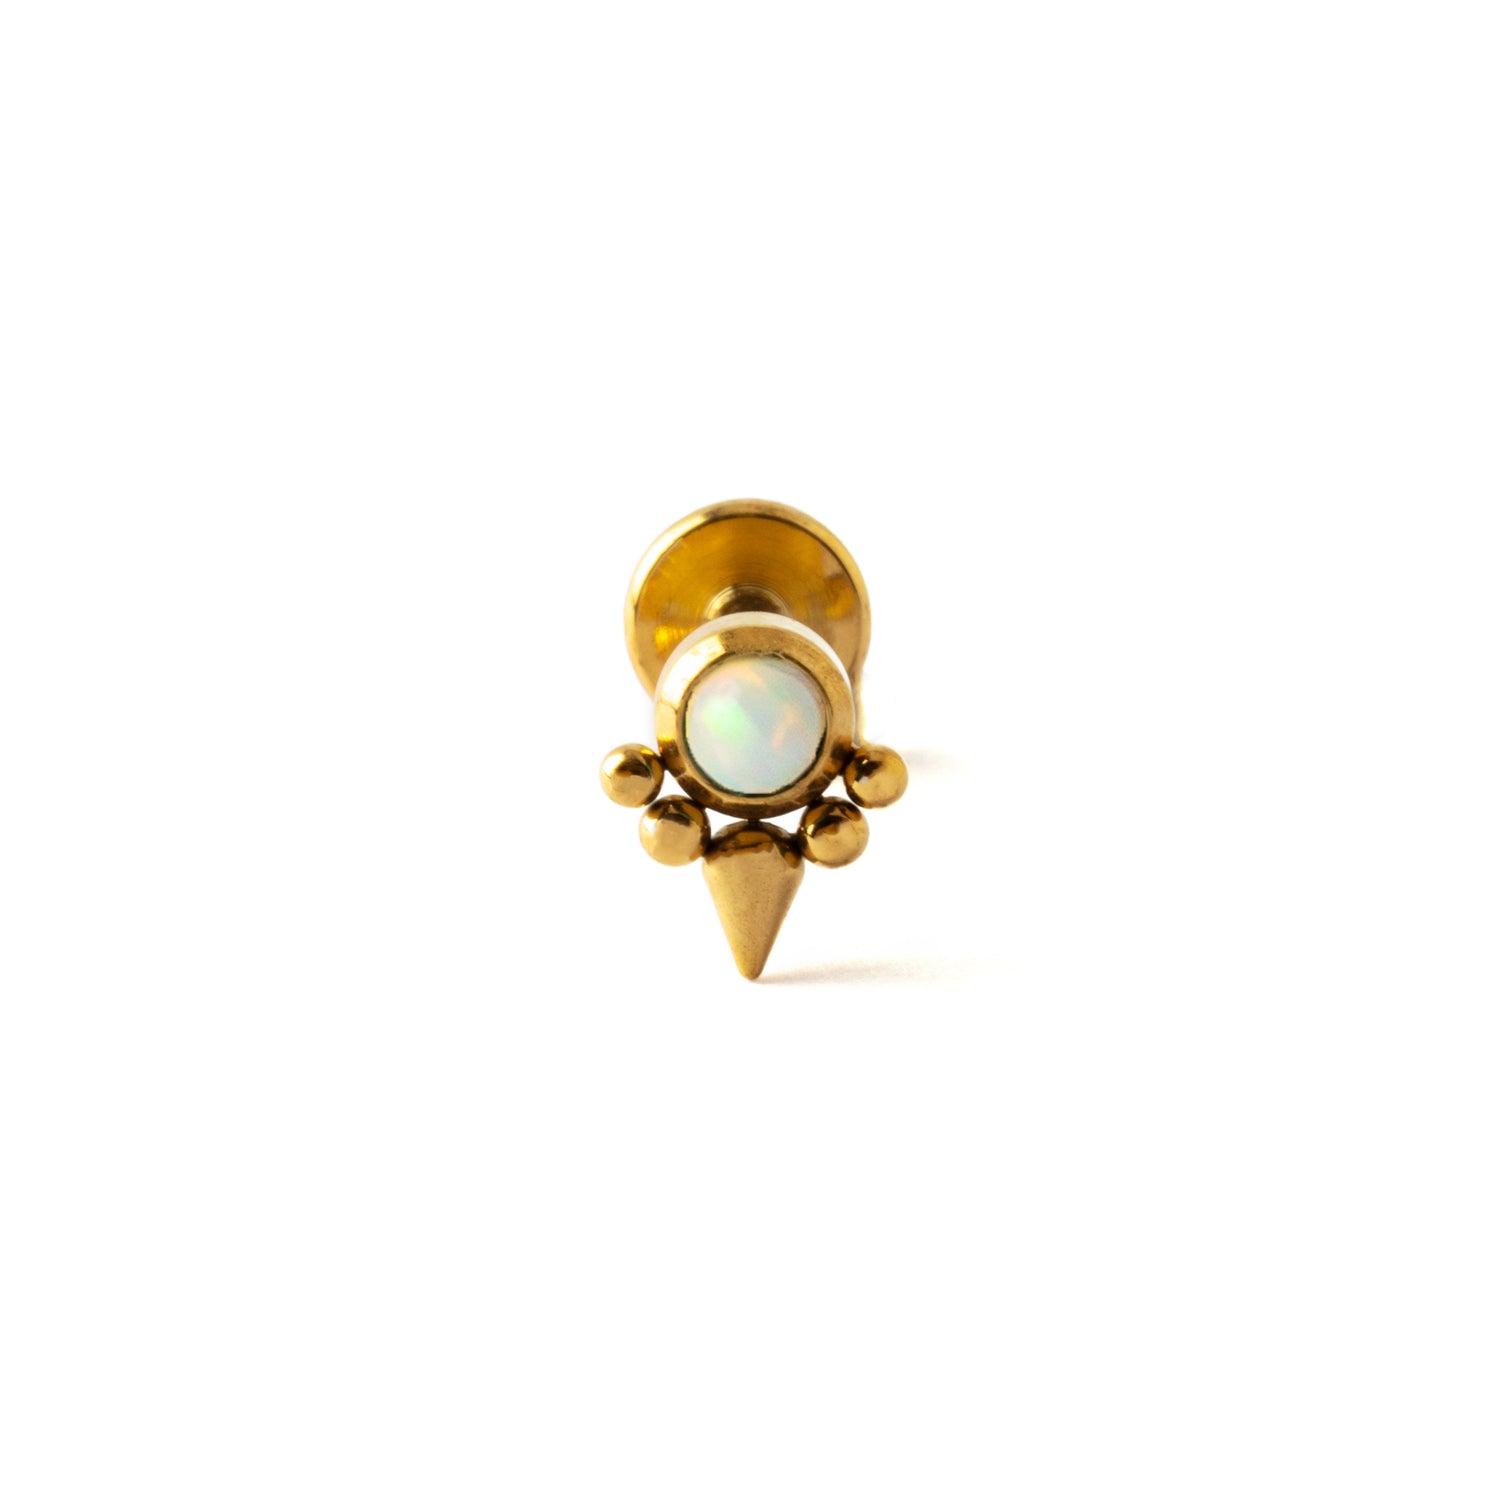 Elvira Gold surgical steel internally threaded Labret with White Opal frontal view